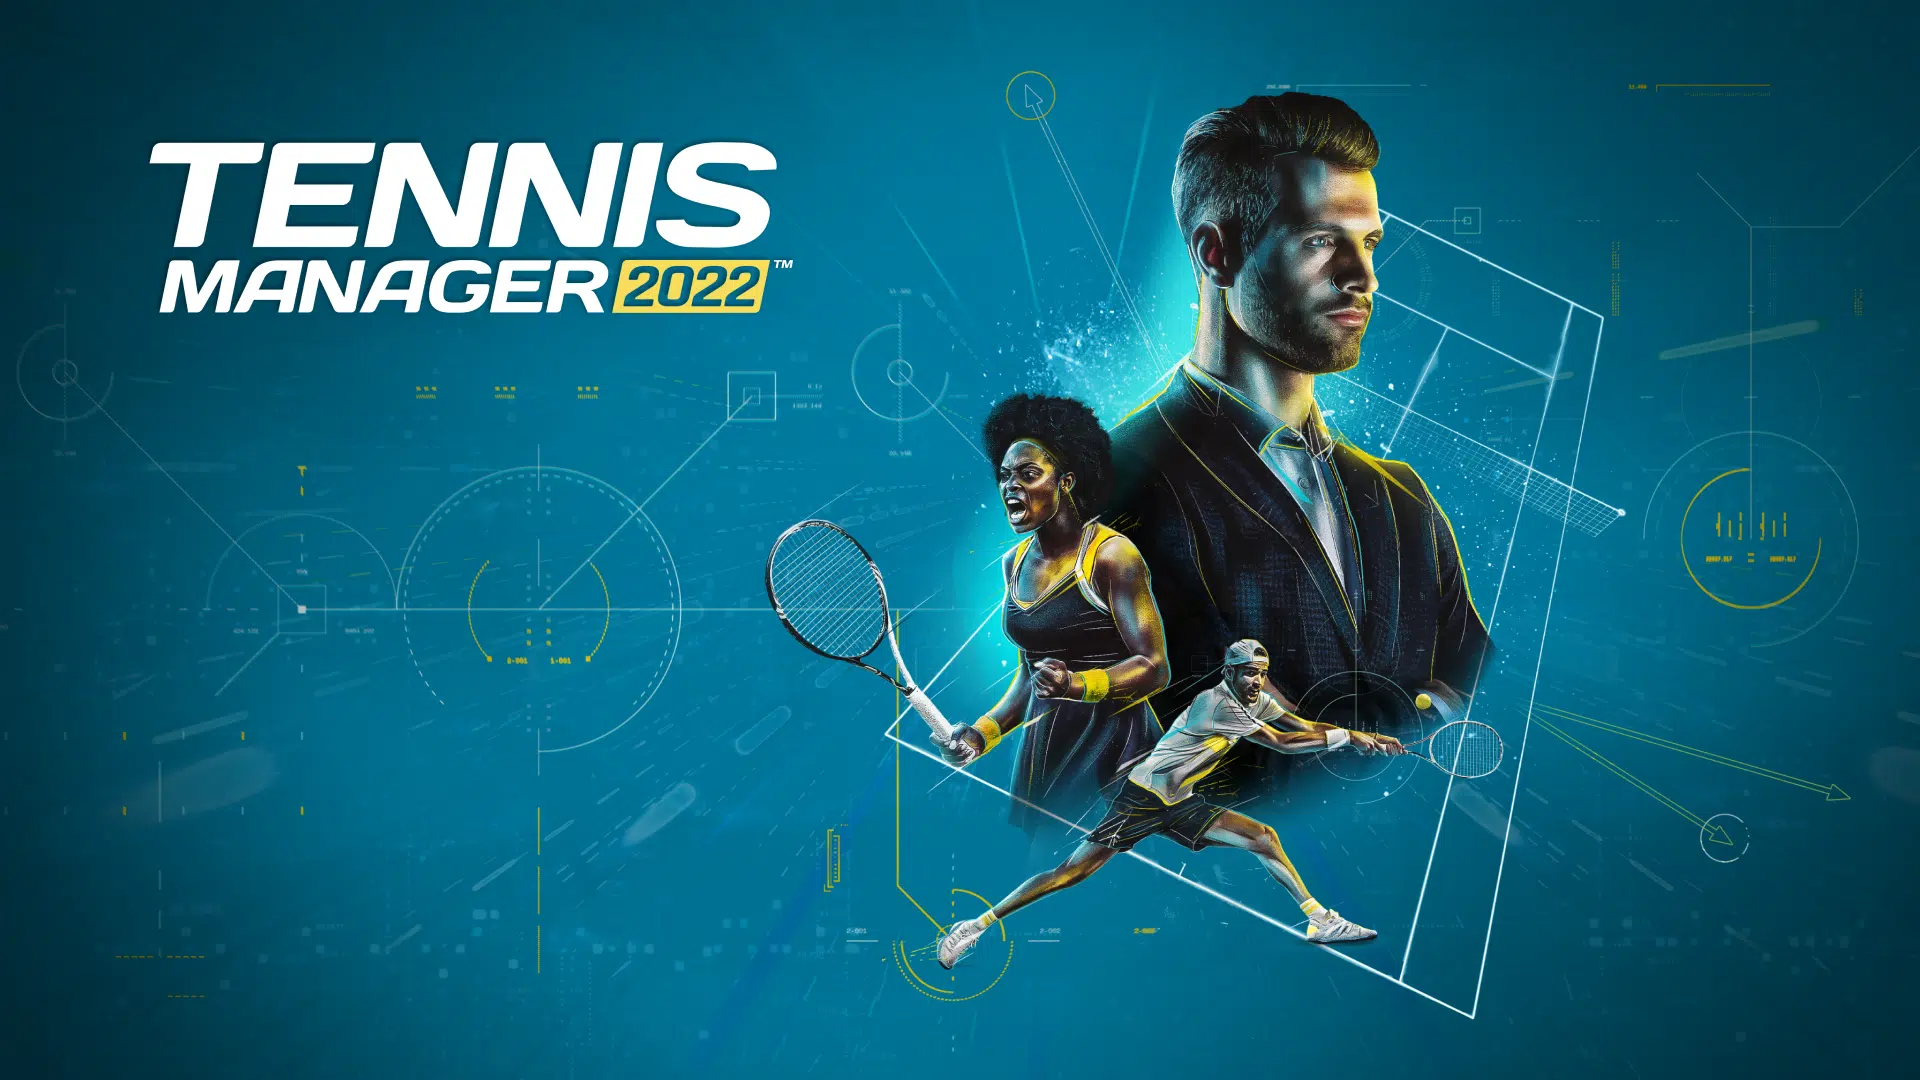 Tennis Manager 2022 Release Date